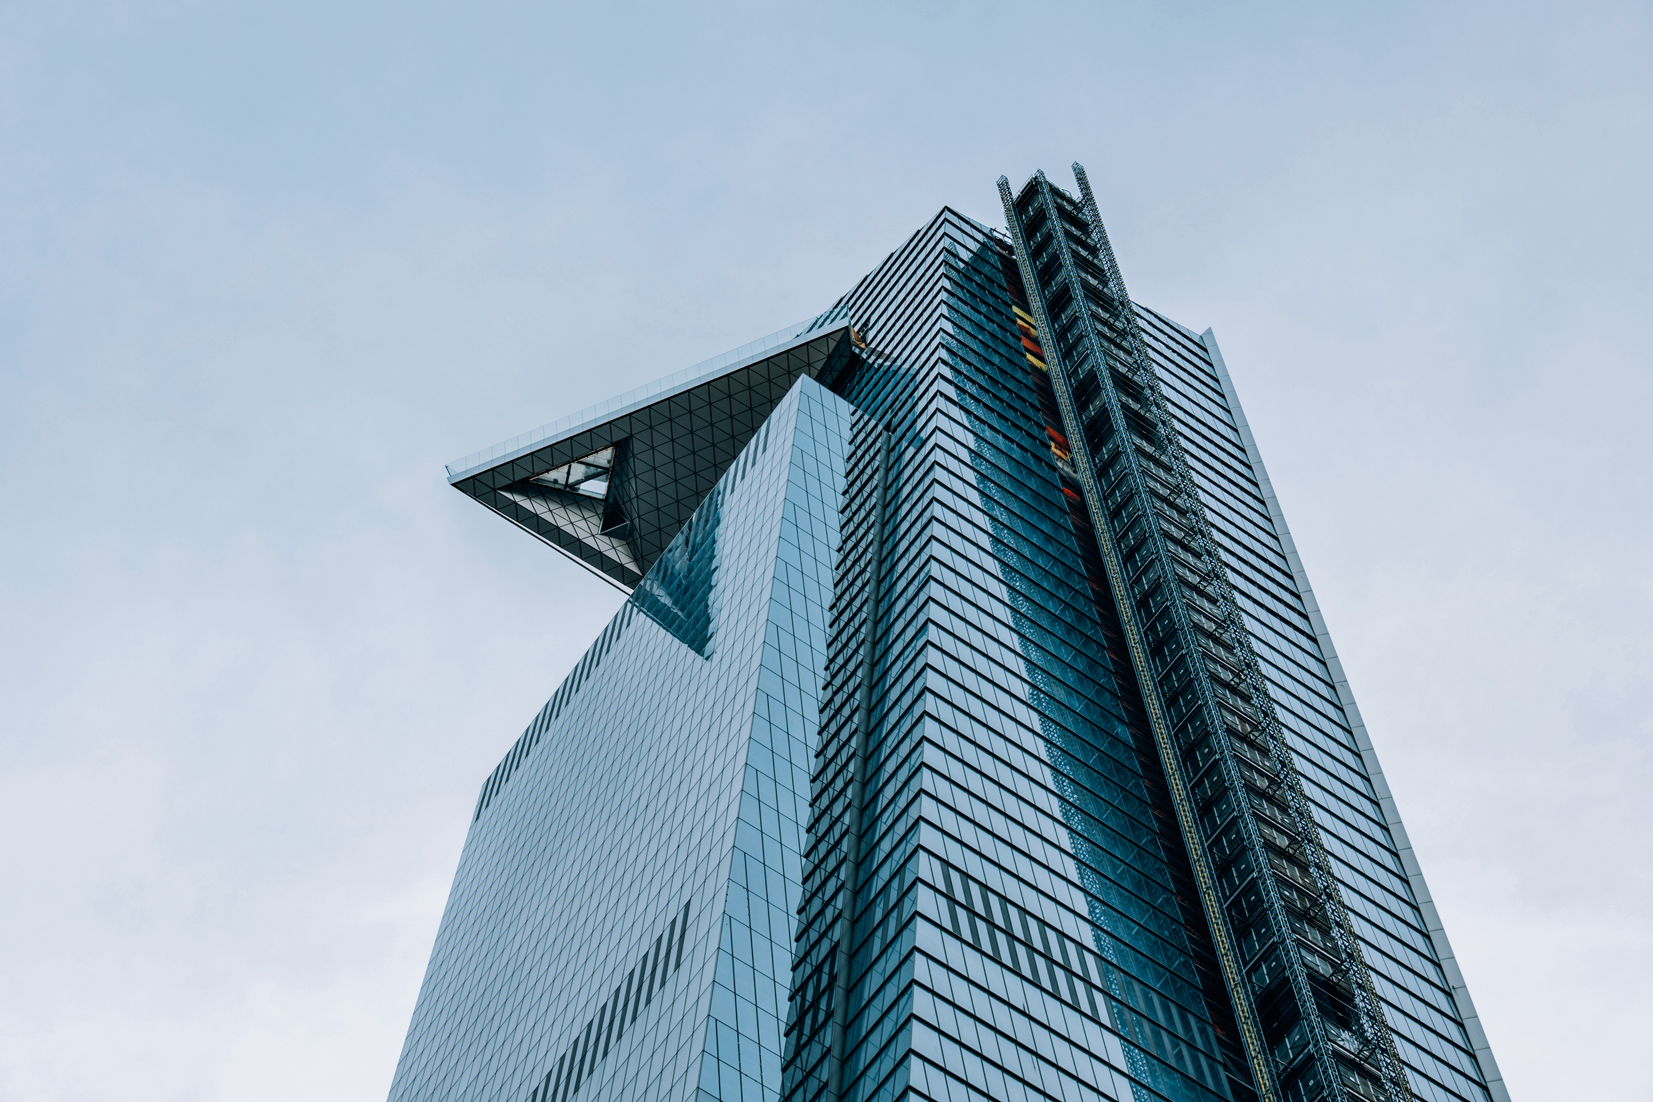 30 Hudson Yards skyscraper in New York City that has a unique triangular observation deck known as The Edge.